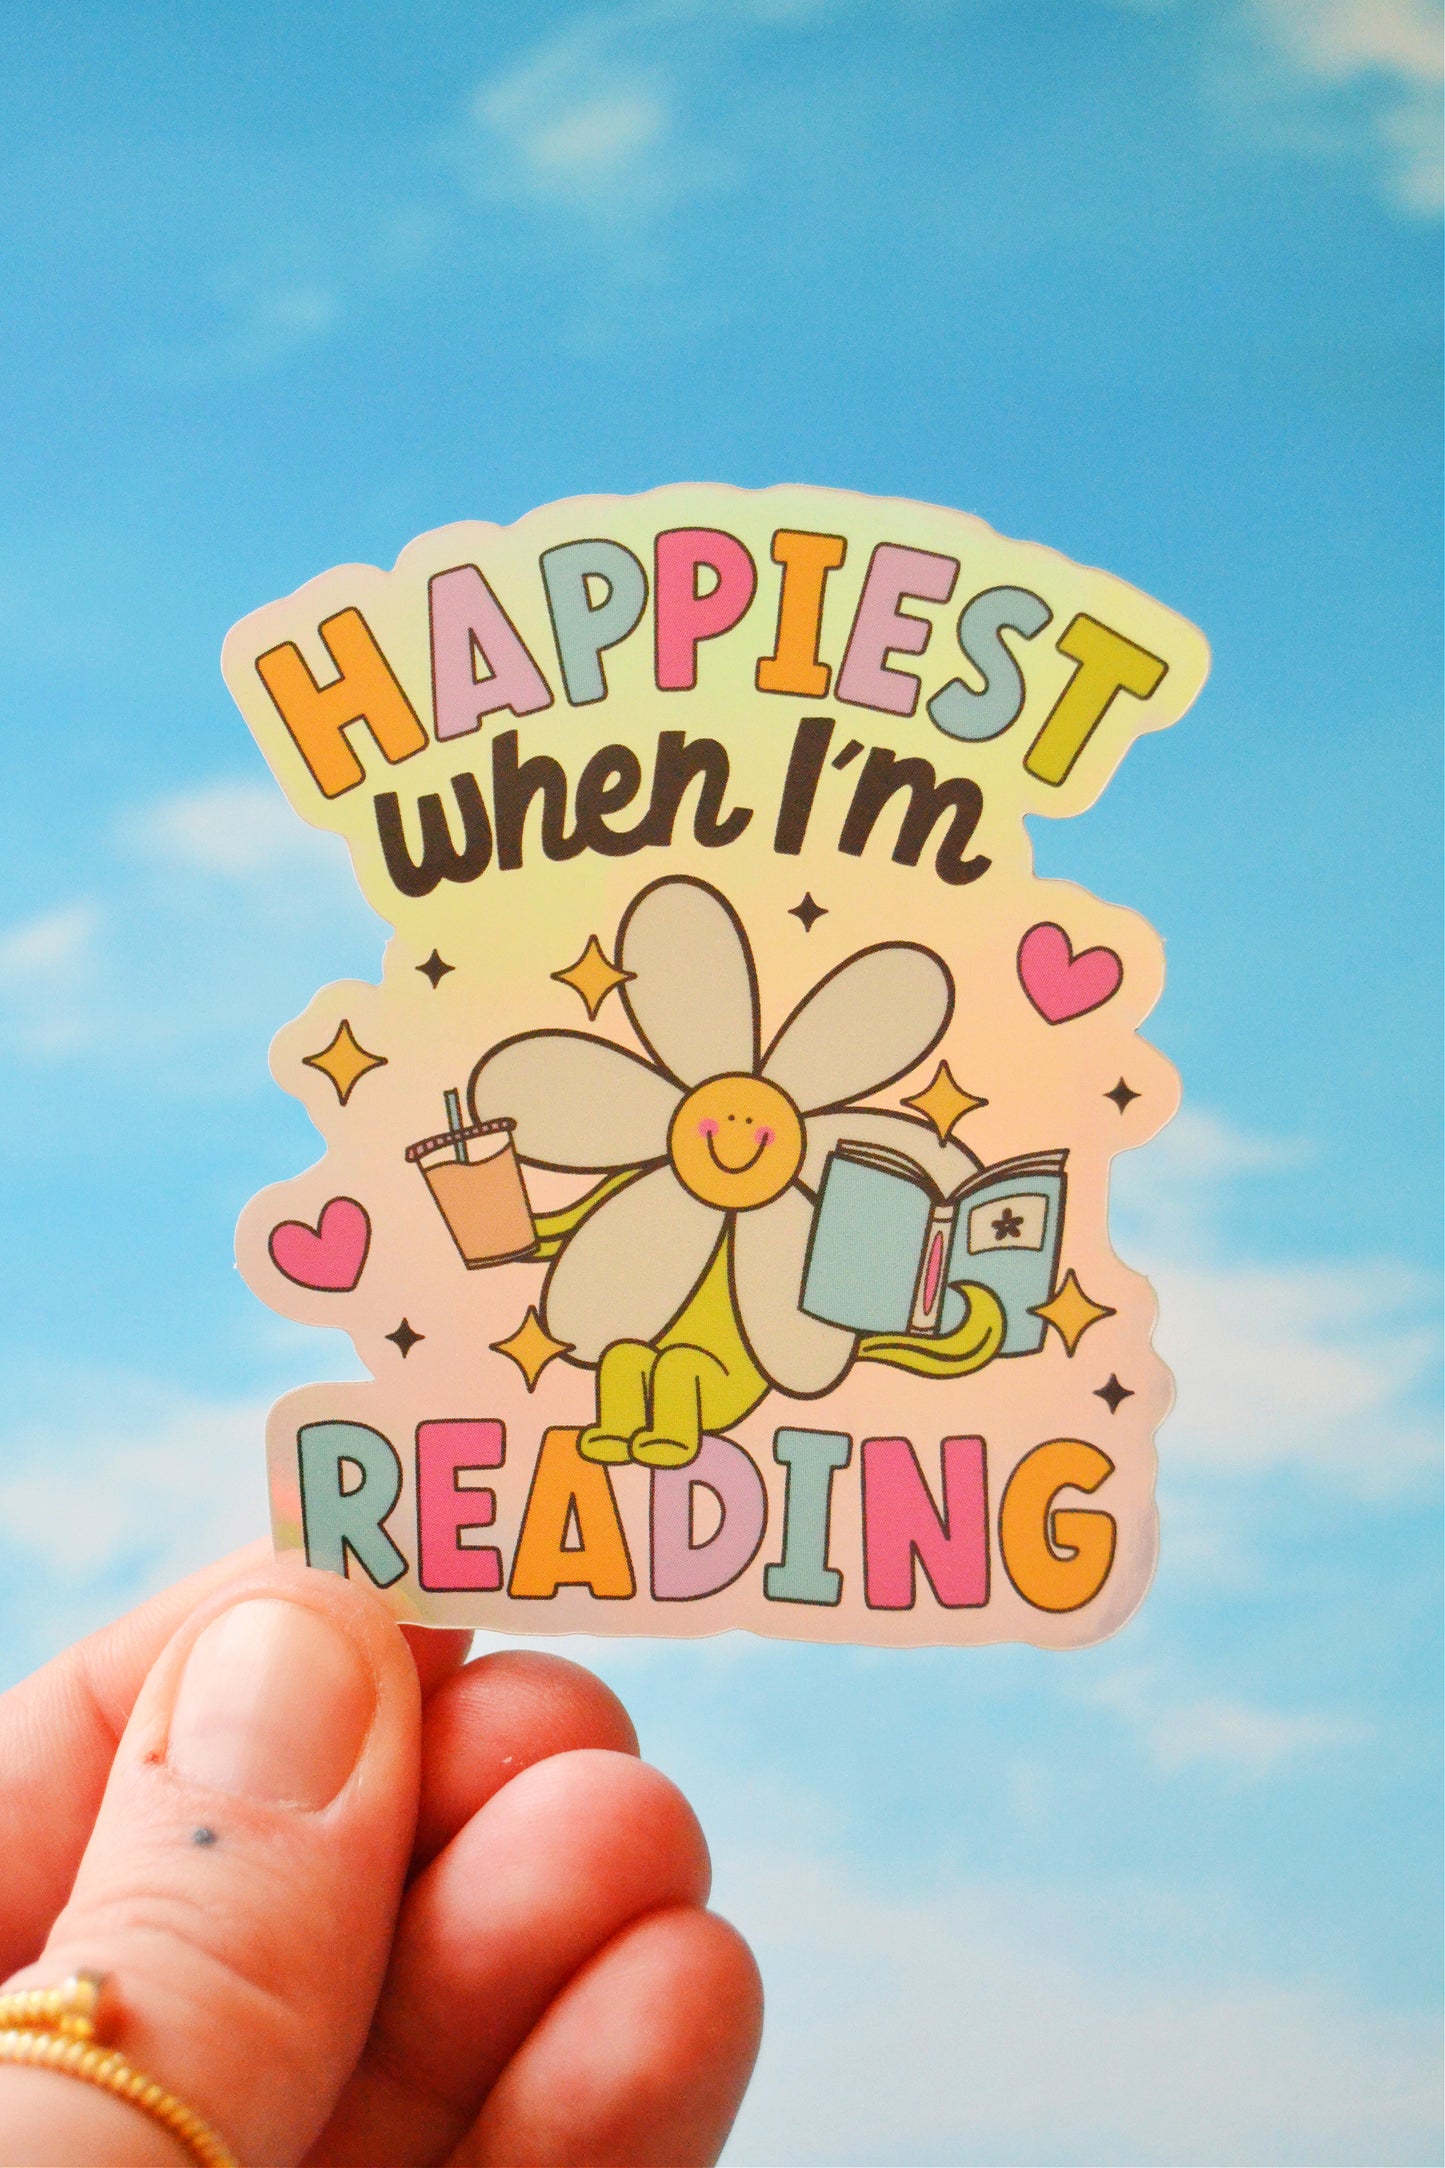 Happiest When I'm Reading Holographic Sticker